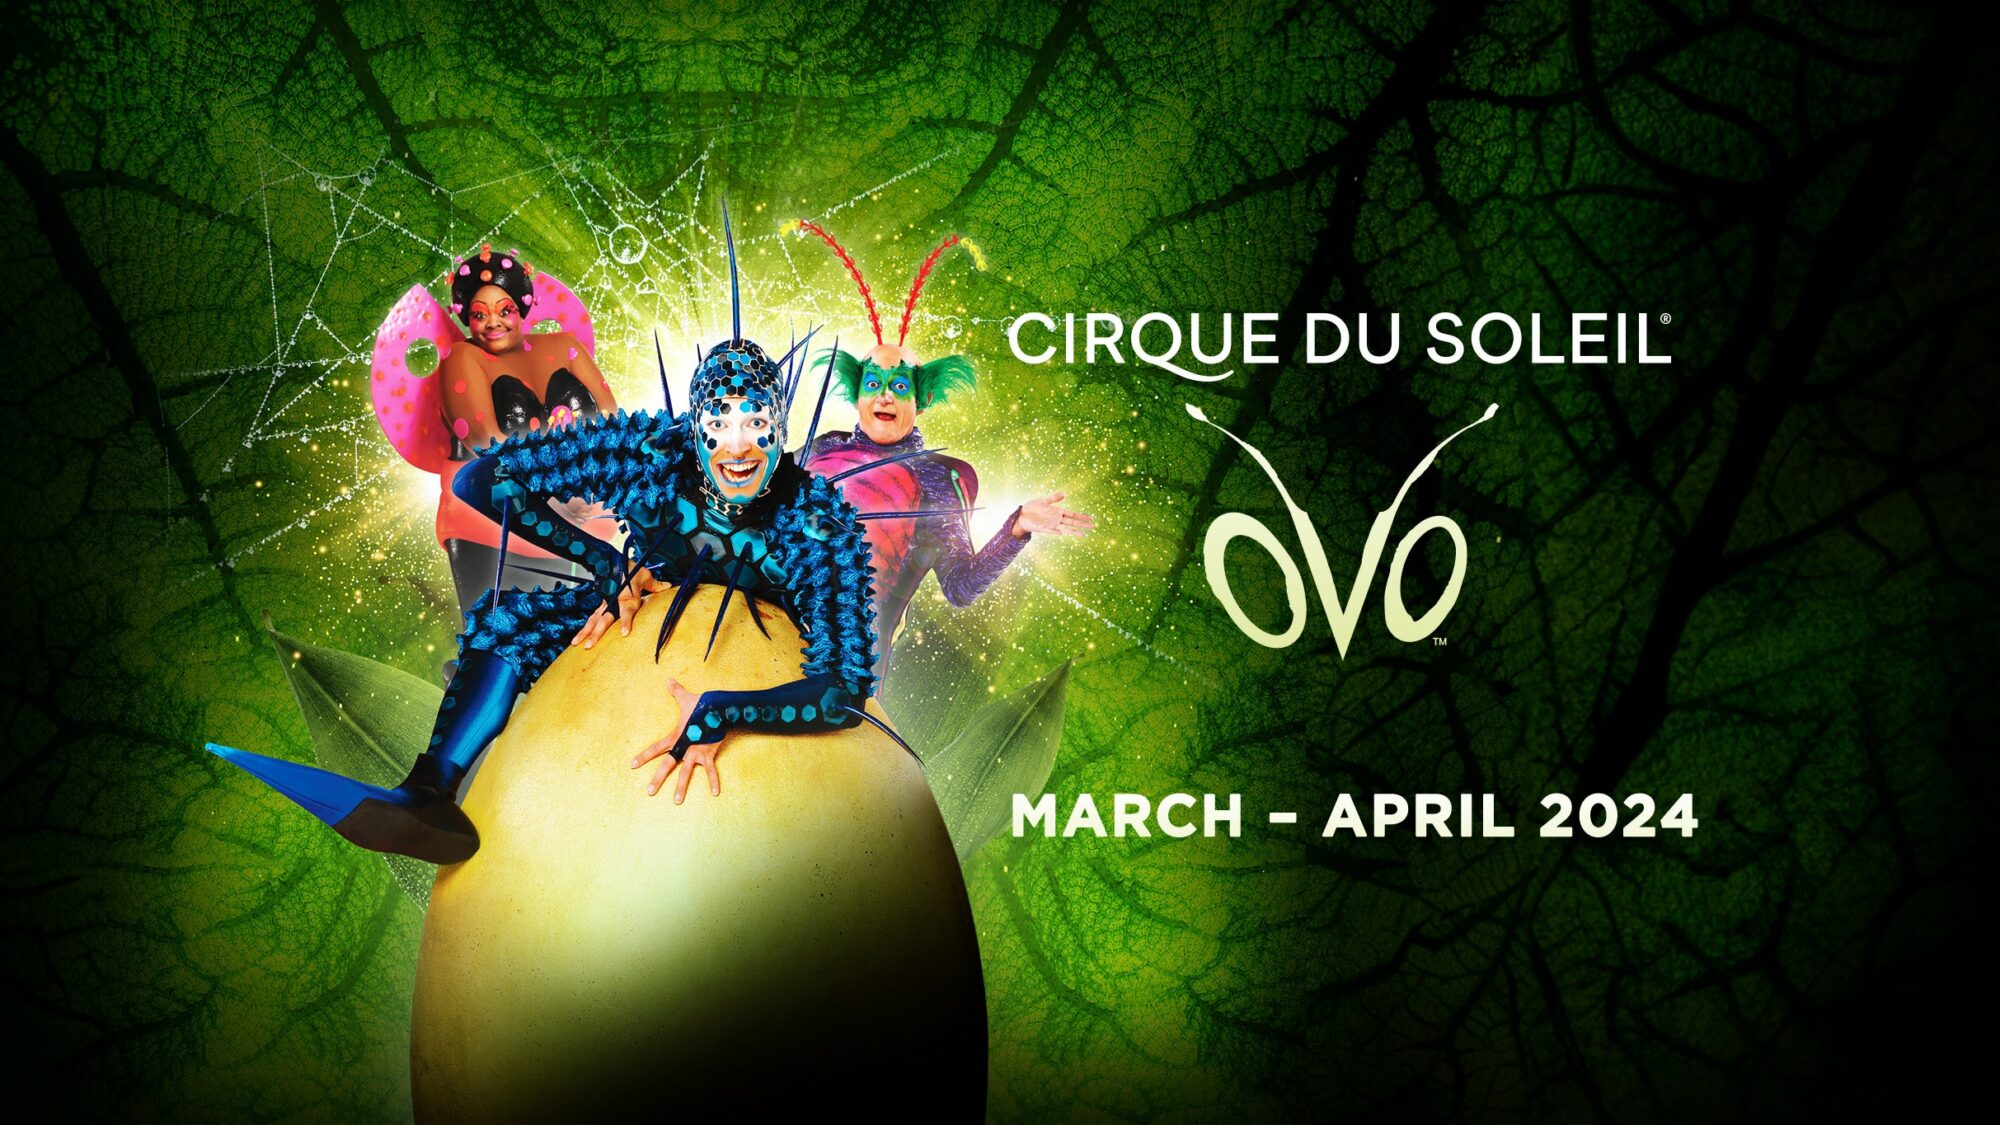 Image name Cirque Du Soleil Ovo at First Direct Arena Leeds the 26 image from the post Cirque Du Soleil : Ovo at First Direct Arena, Leeds in Yorkshire.com.